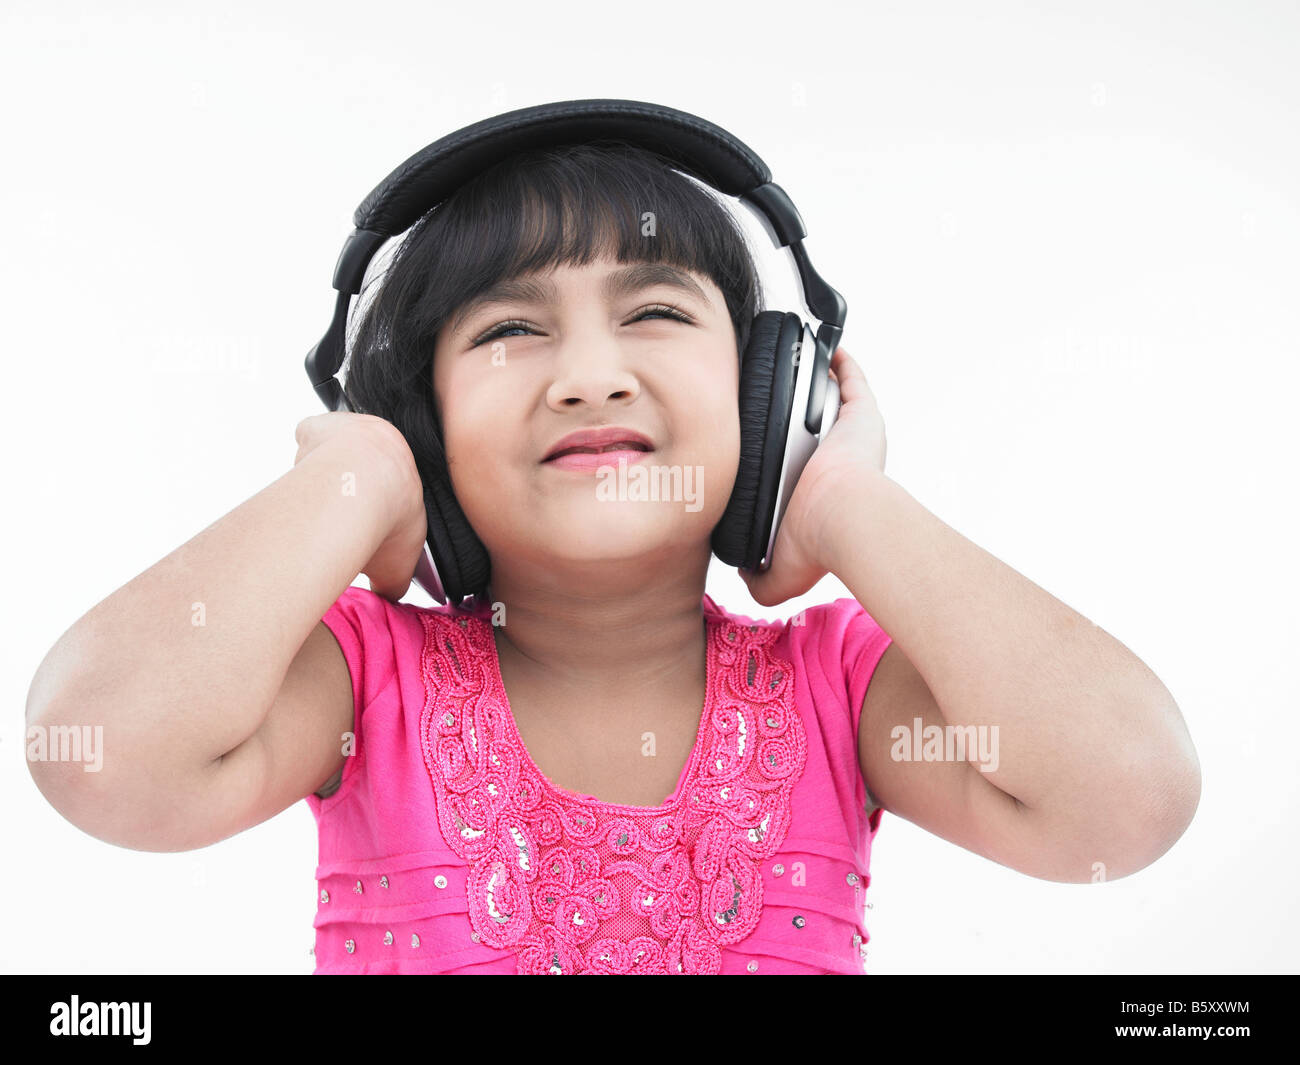 Indian Child Girl Headphone Hearing High Resolution Stock Photography and  Images - Alamy